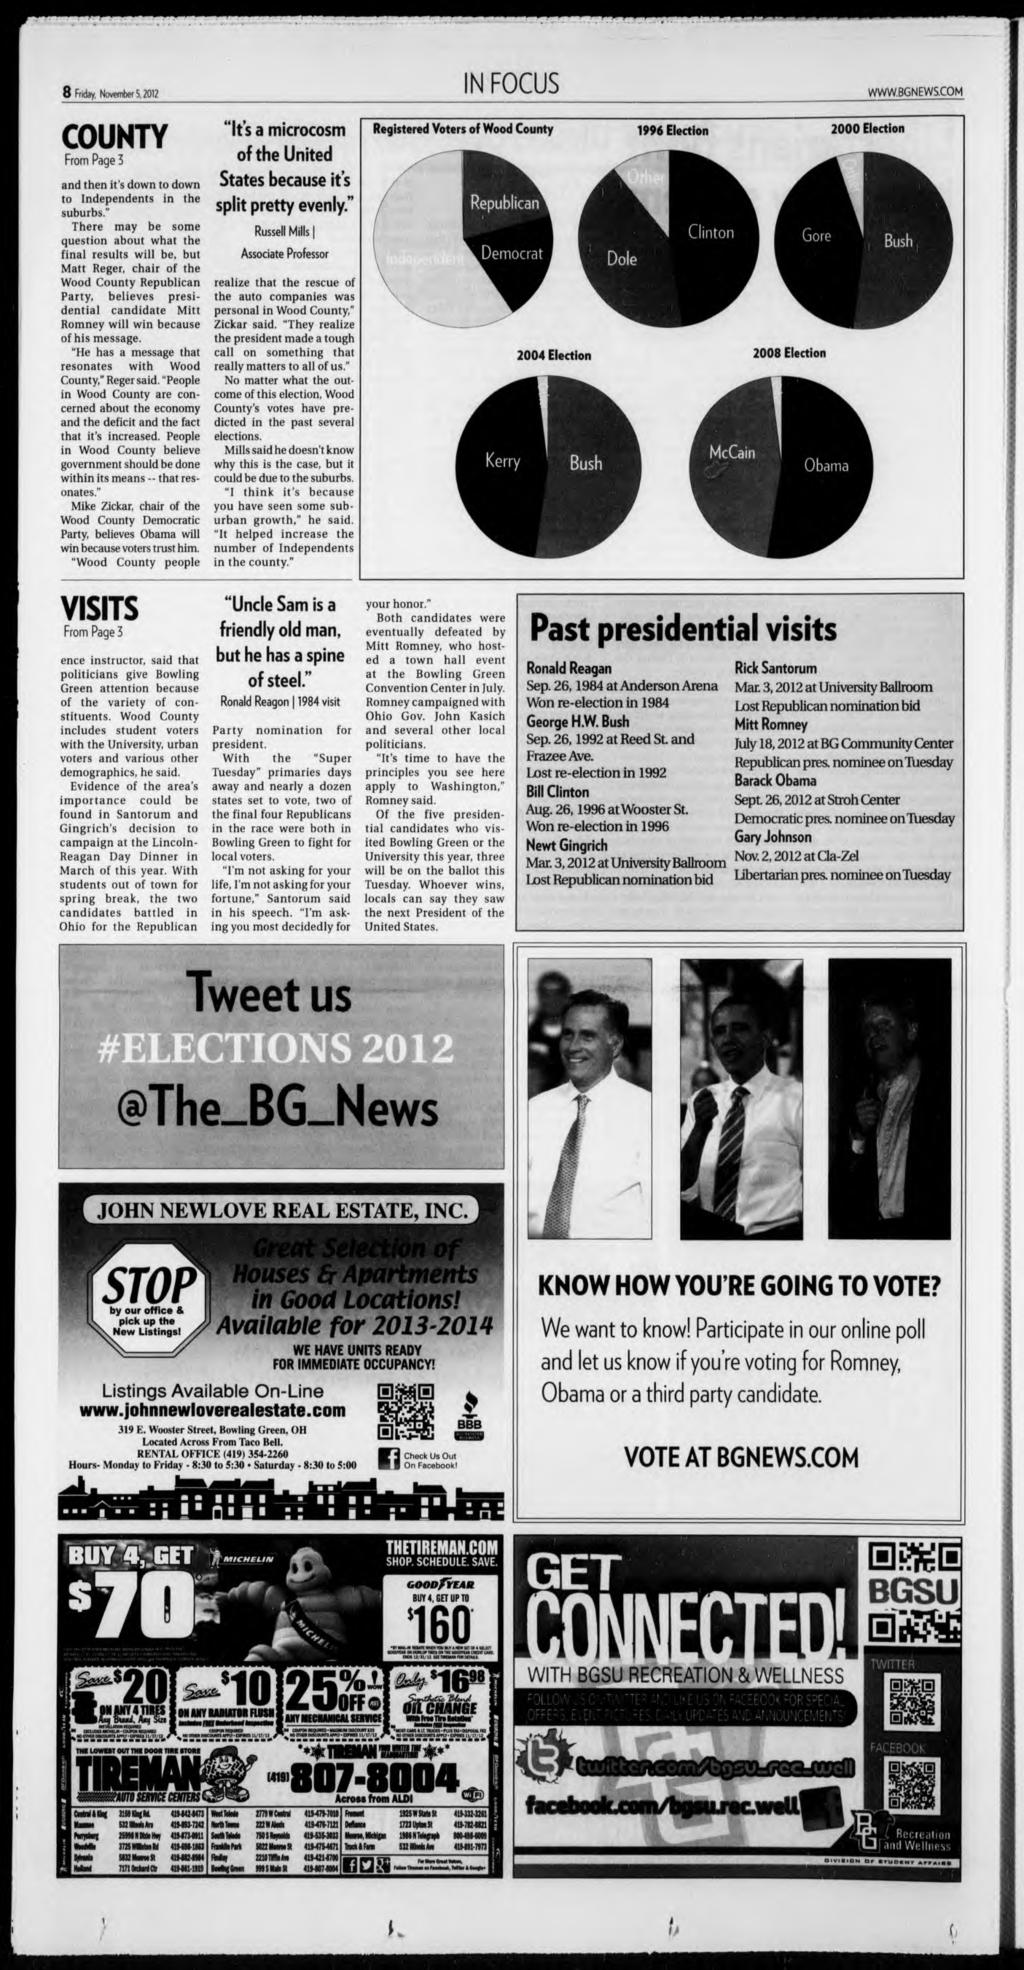 8 Friday. November 5,2012 FOCUS WWW.8GNEWS.COM COUNTY From Page 3 and then it's down to down to Independents in the suburbs.